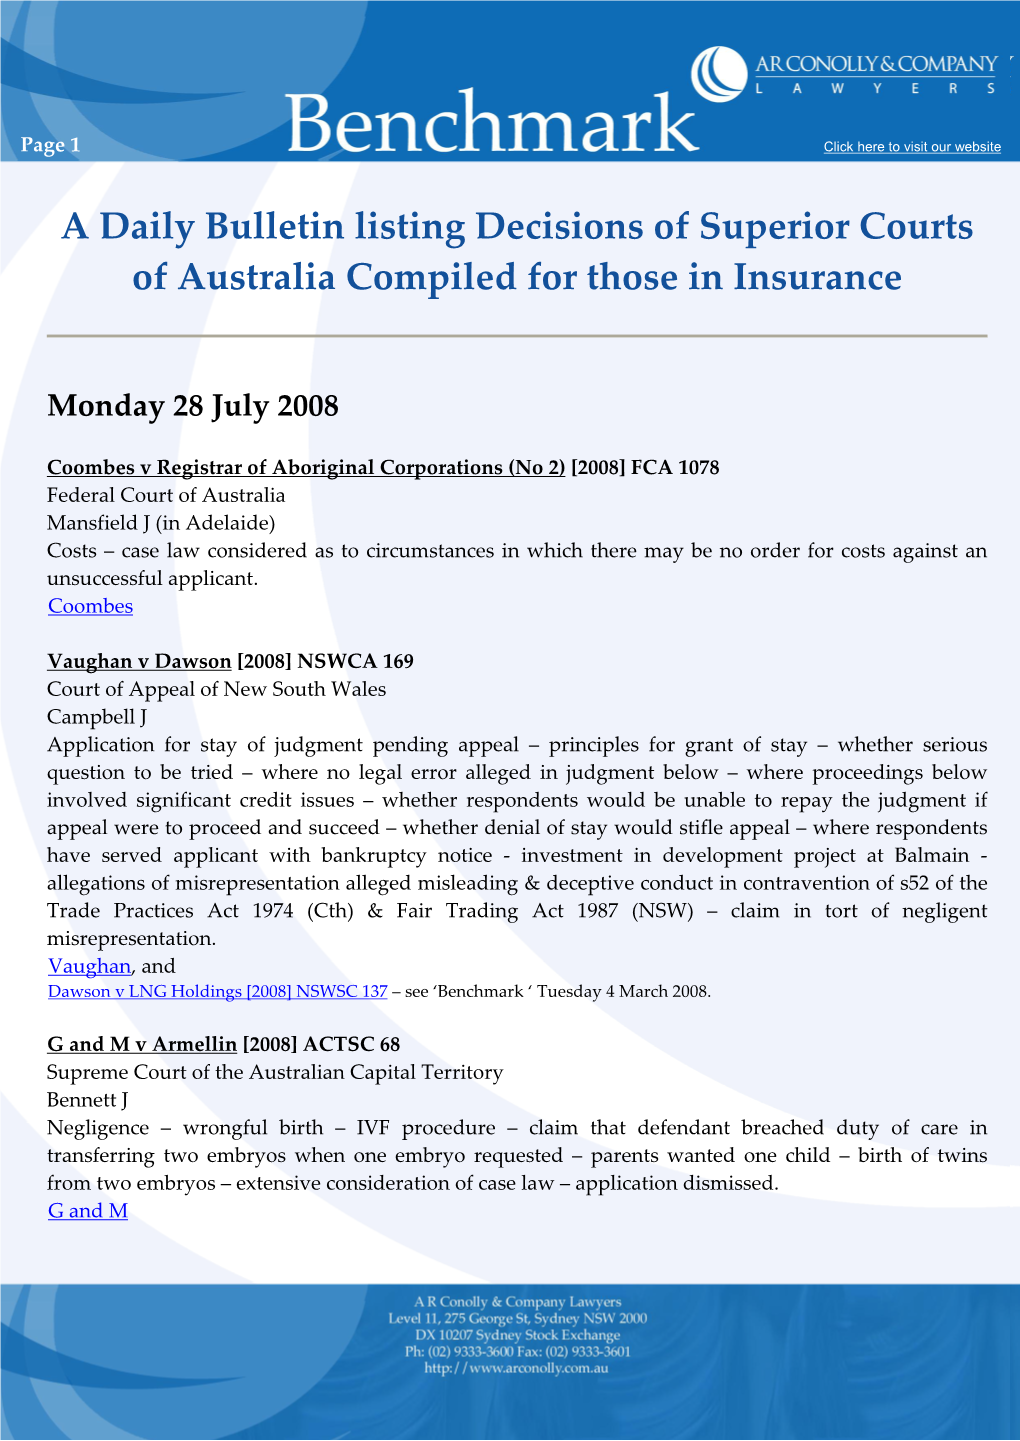 A Daily Bulletin Listing Decisions of Superior Courts of Australia Compiled for Those in Insurance